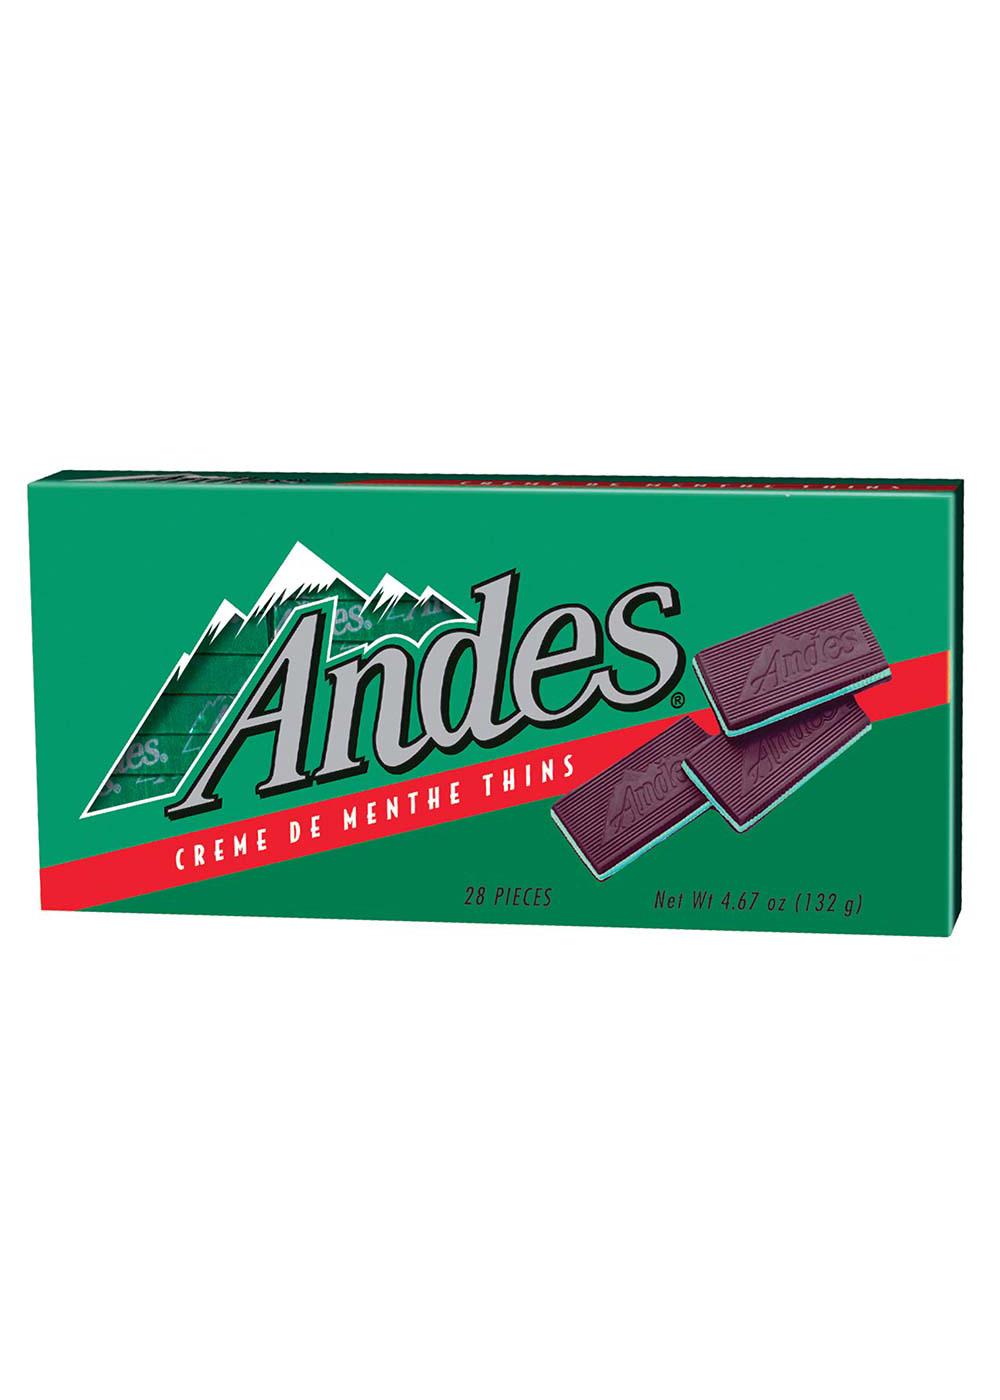 Andes Creme de Menthe Thins Candy; image 1 of 2